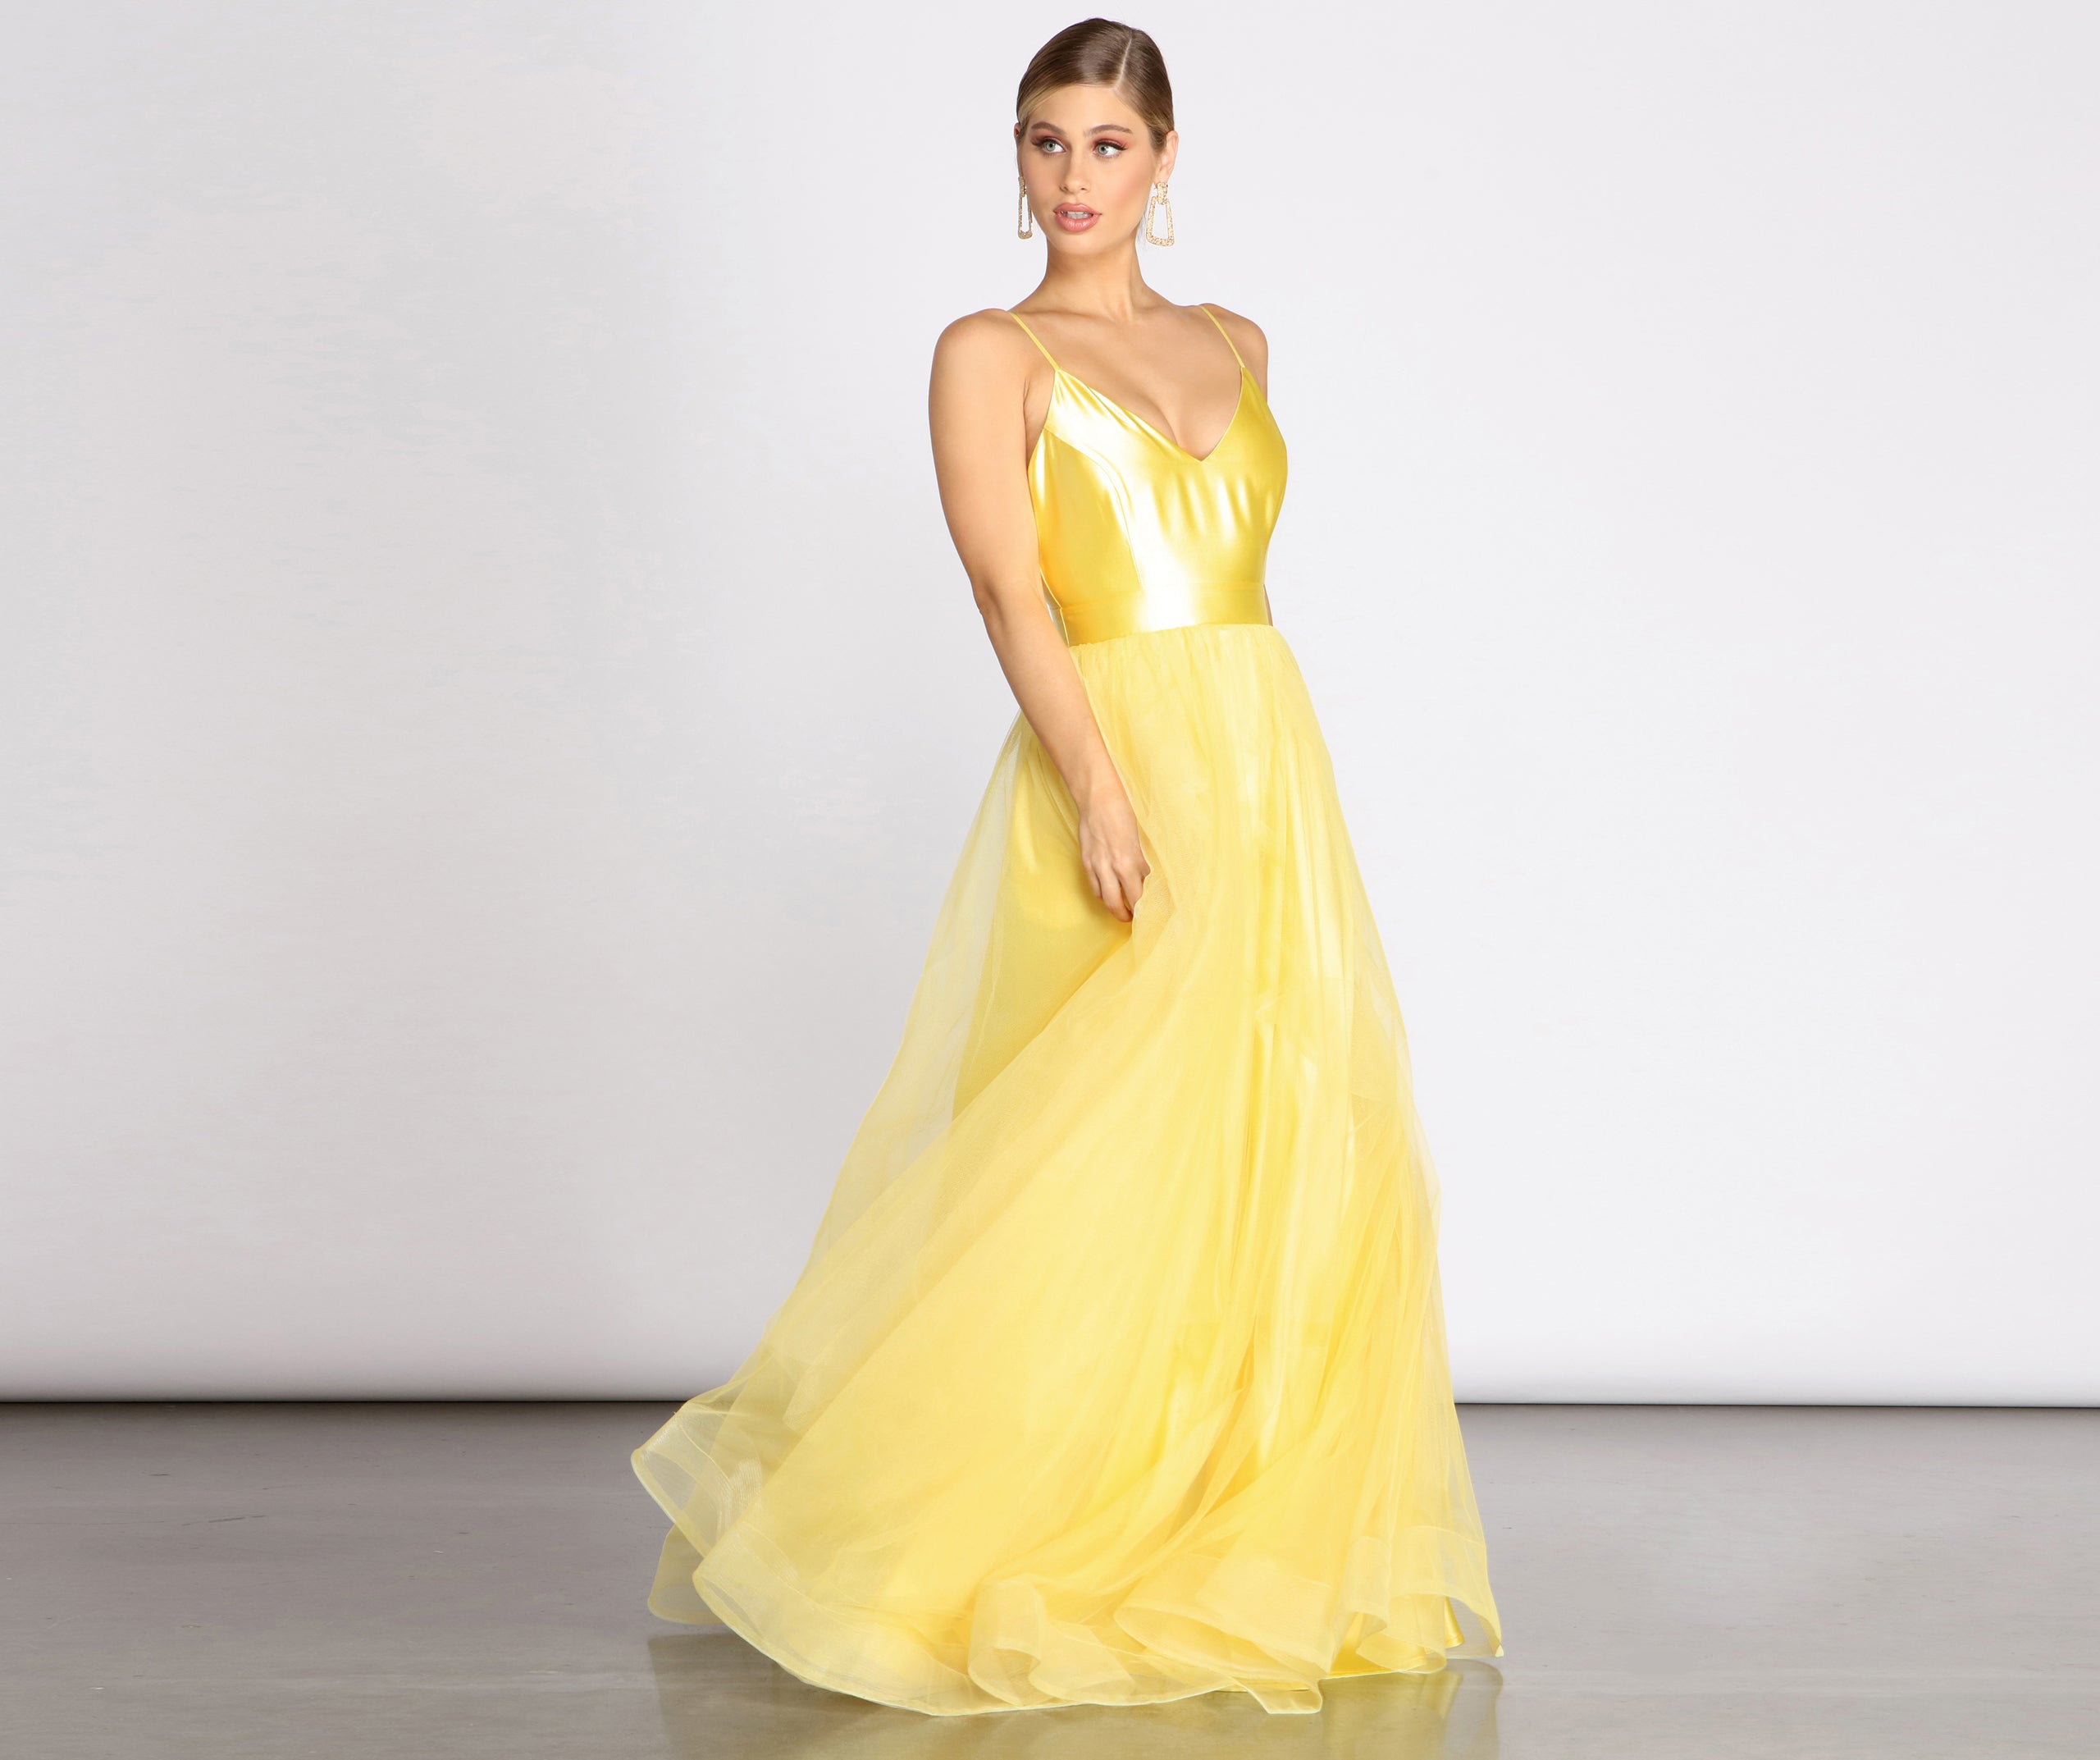 Belle Satin Tulle Ball Gown